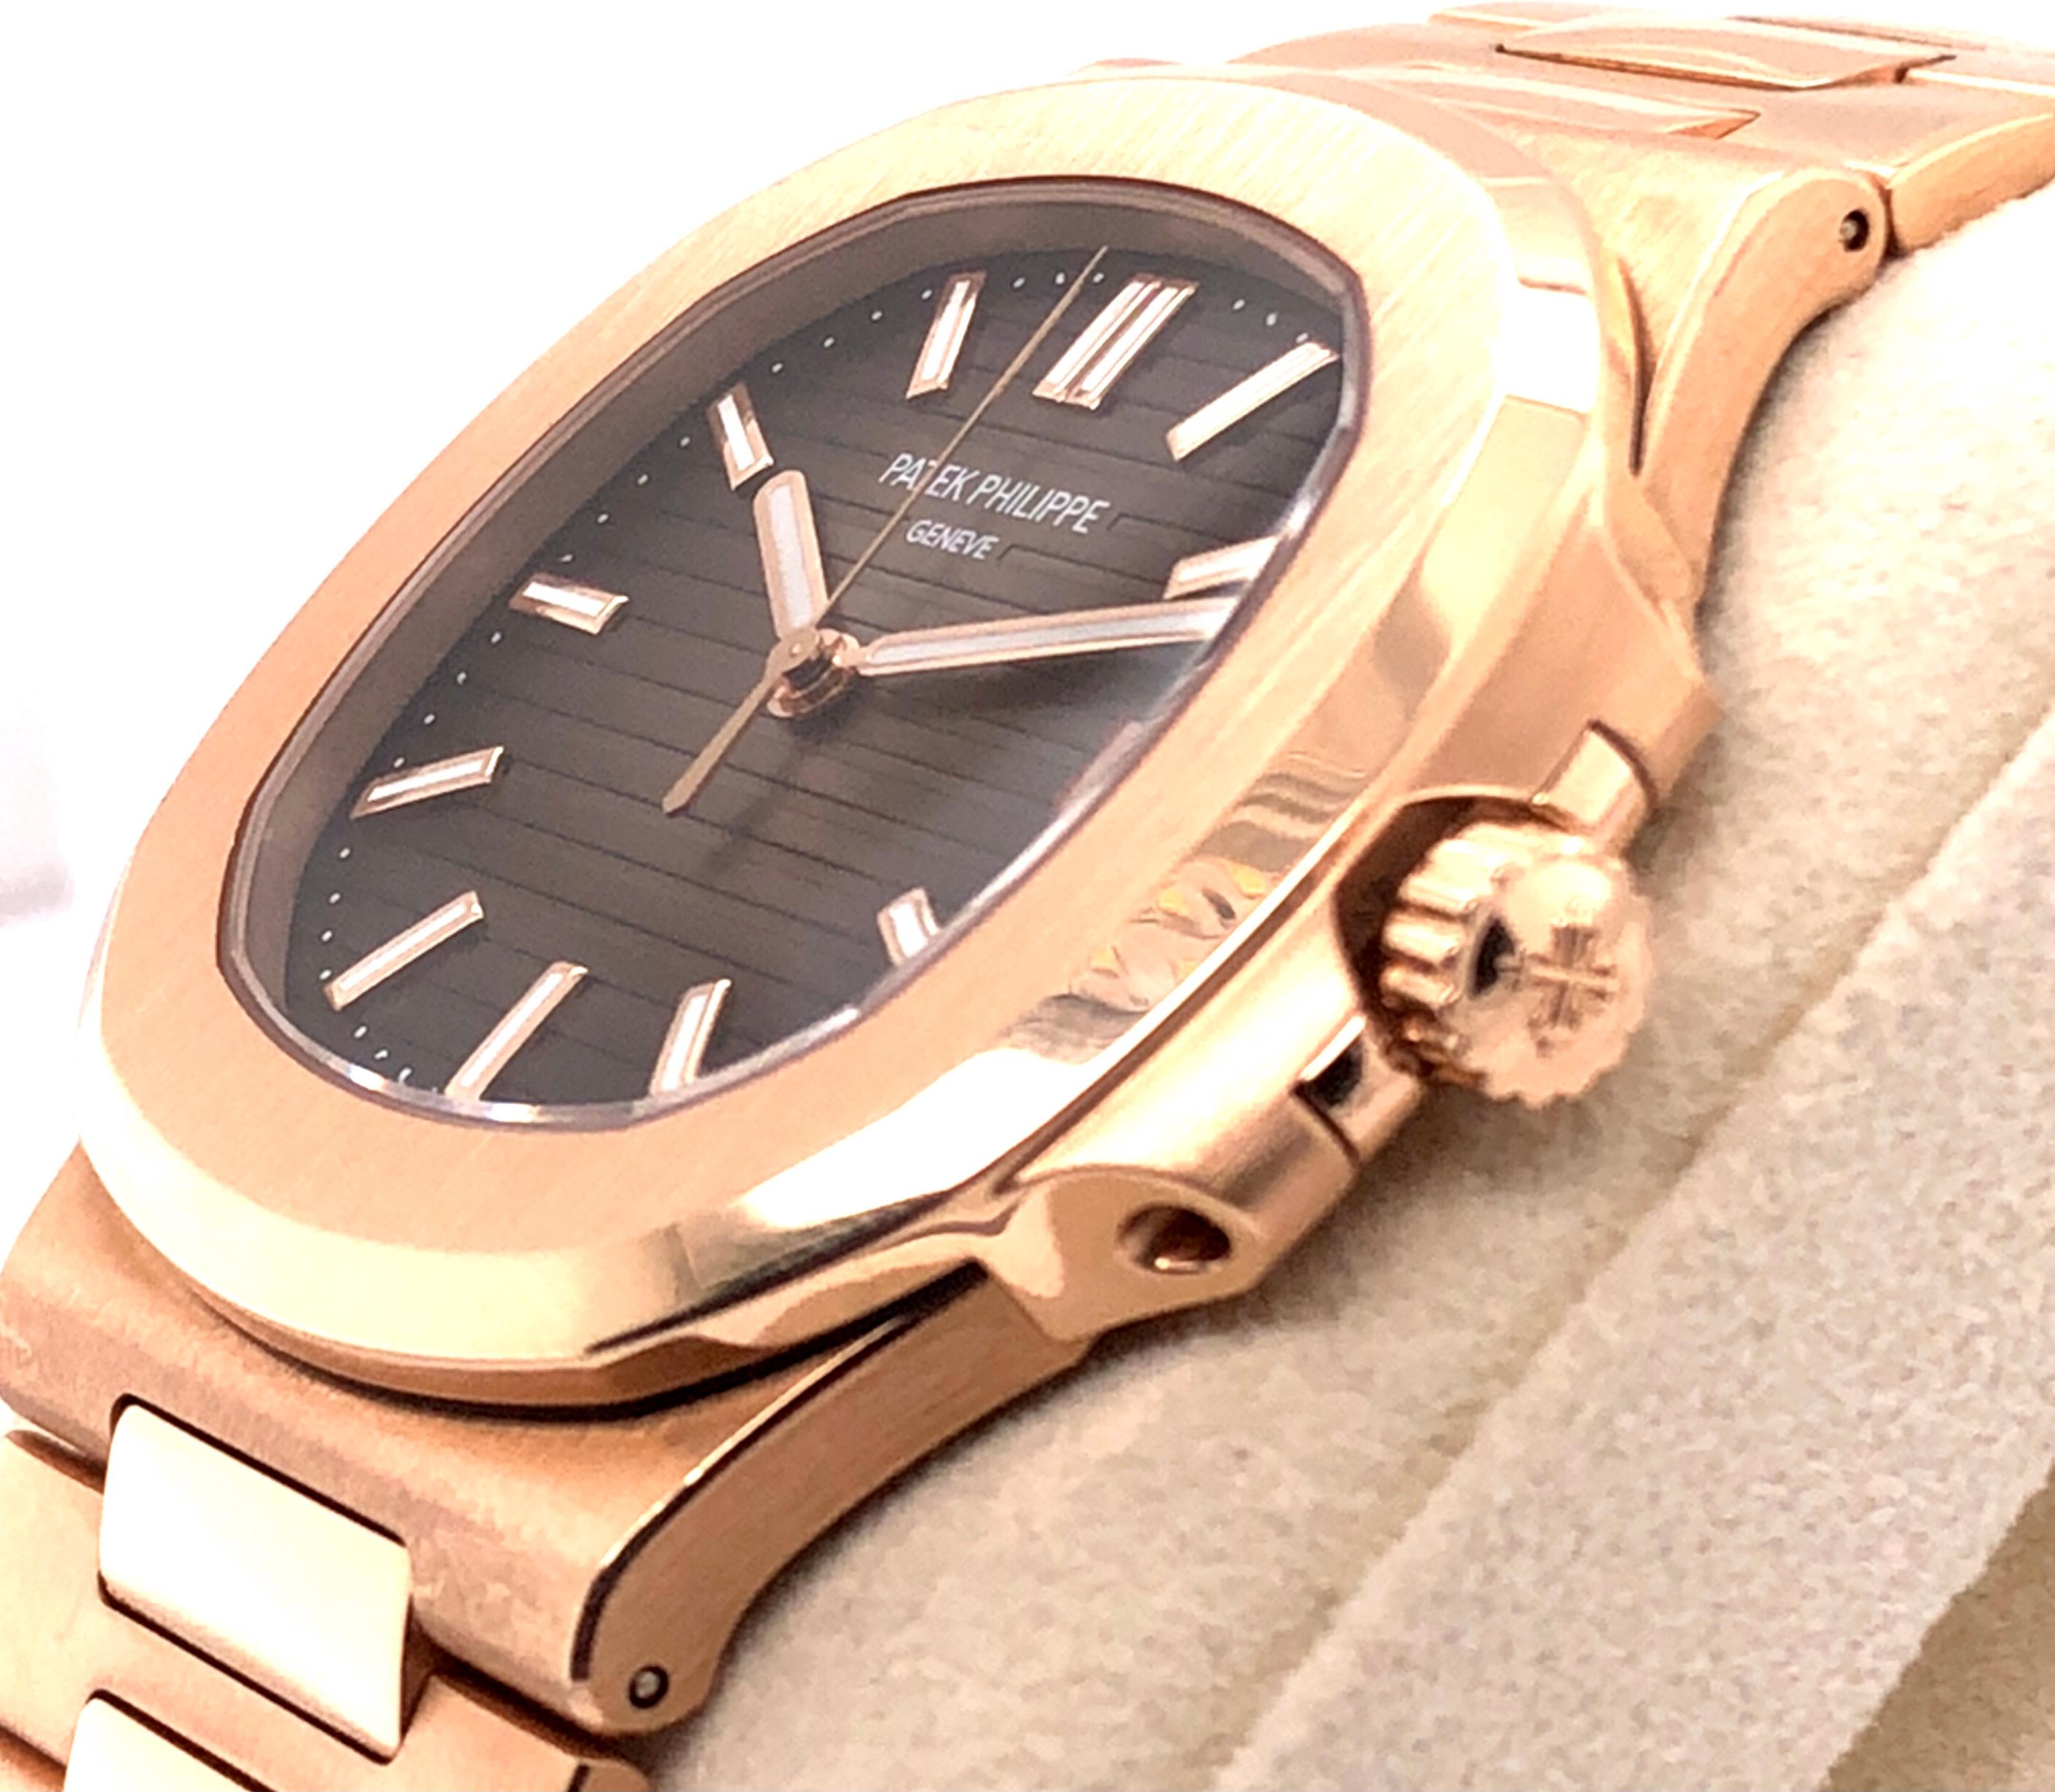 Patek Philippe Rose Gold 5711/1R Nautilus Jumbo. The watch of all watches. Worn three times, come complete with box, papers, dust cover and original purchase receipt. Works wonderfully and is in immaculate condition. 
Brown Anthracite 